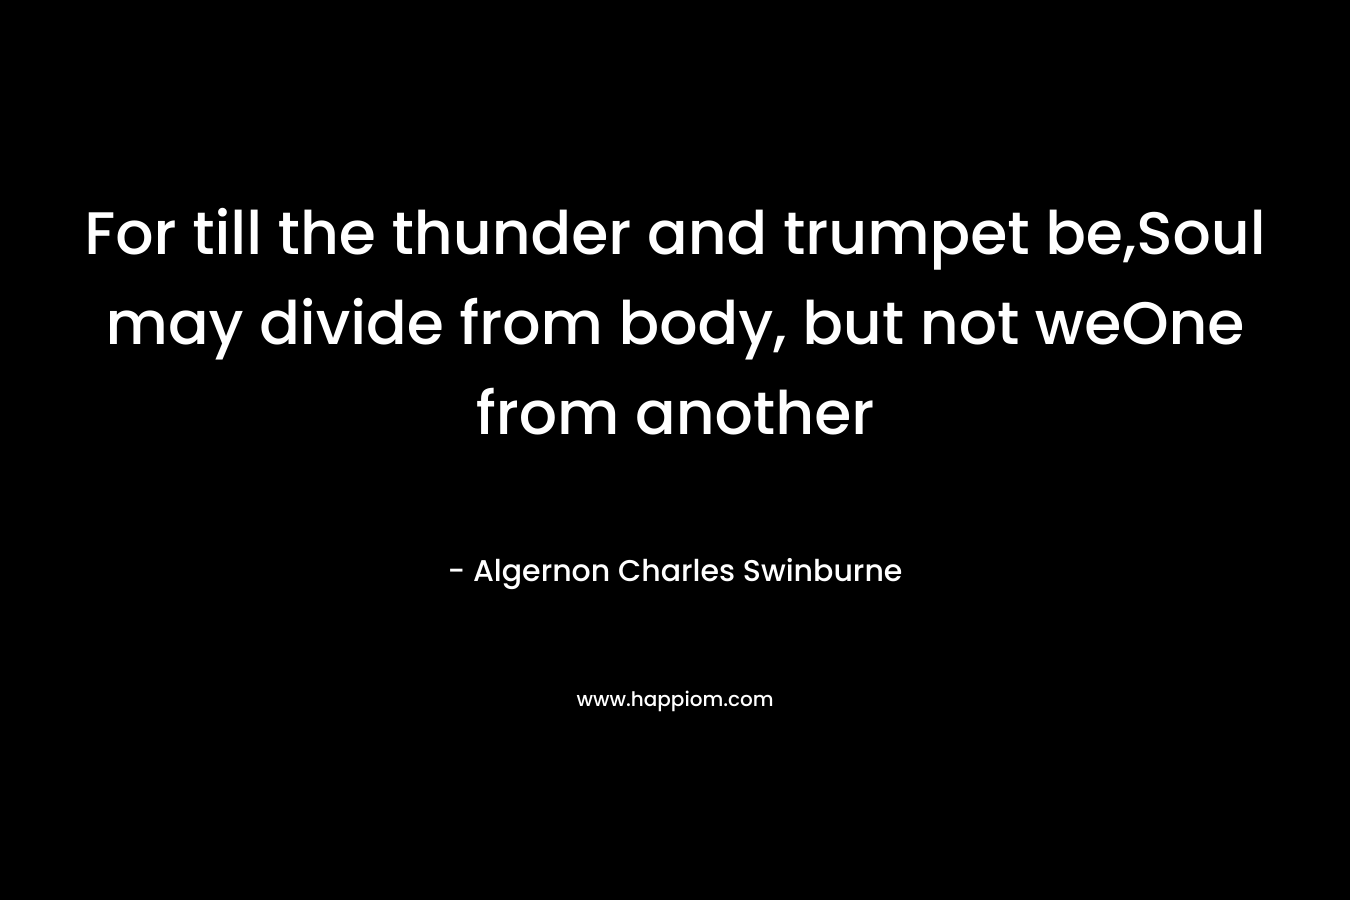 For till the thunder and trumpet be,Soul may divide from body, but not weOne from another